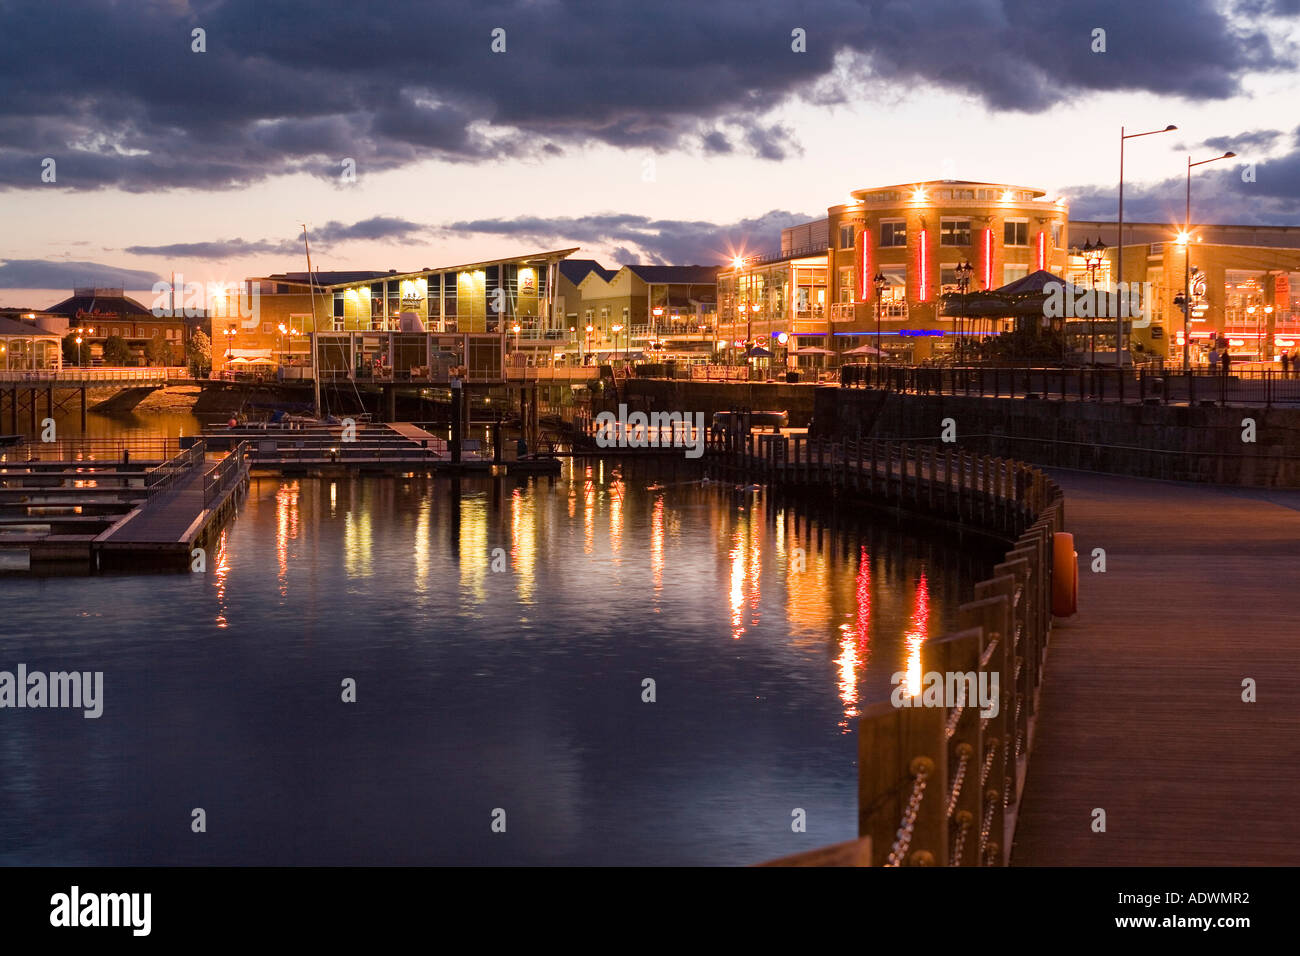 Wales Cardiff Cardiff Bay redeveloped seafront at night Stock Photo